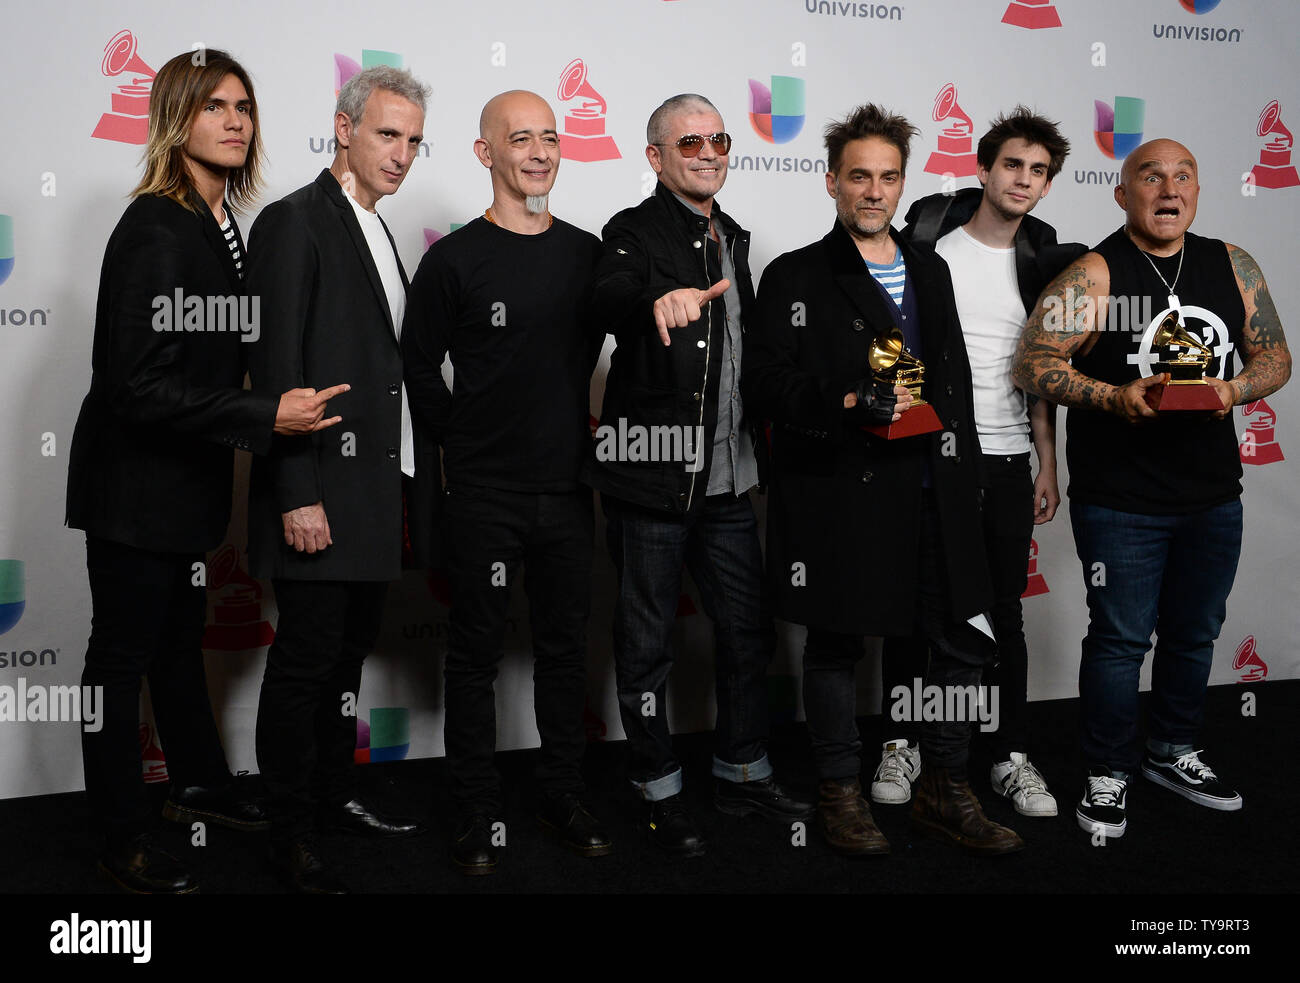 Los Fabulosos Cadillacs appears backstage with the awards for best rock song for "La Tormenta" and best rock album for "La Salvacion De Solo y Juan" during the 17th annual Latin Grammy Awards at T-Mobile Arena in Las Vegas, Nevada on November 17, 2016. Photo by Jim Ruymen/UPI Stock Photo